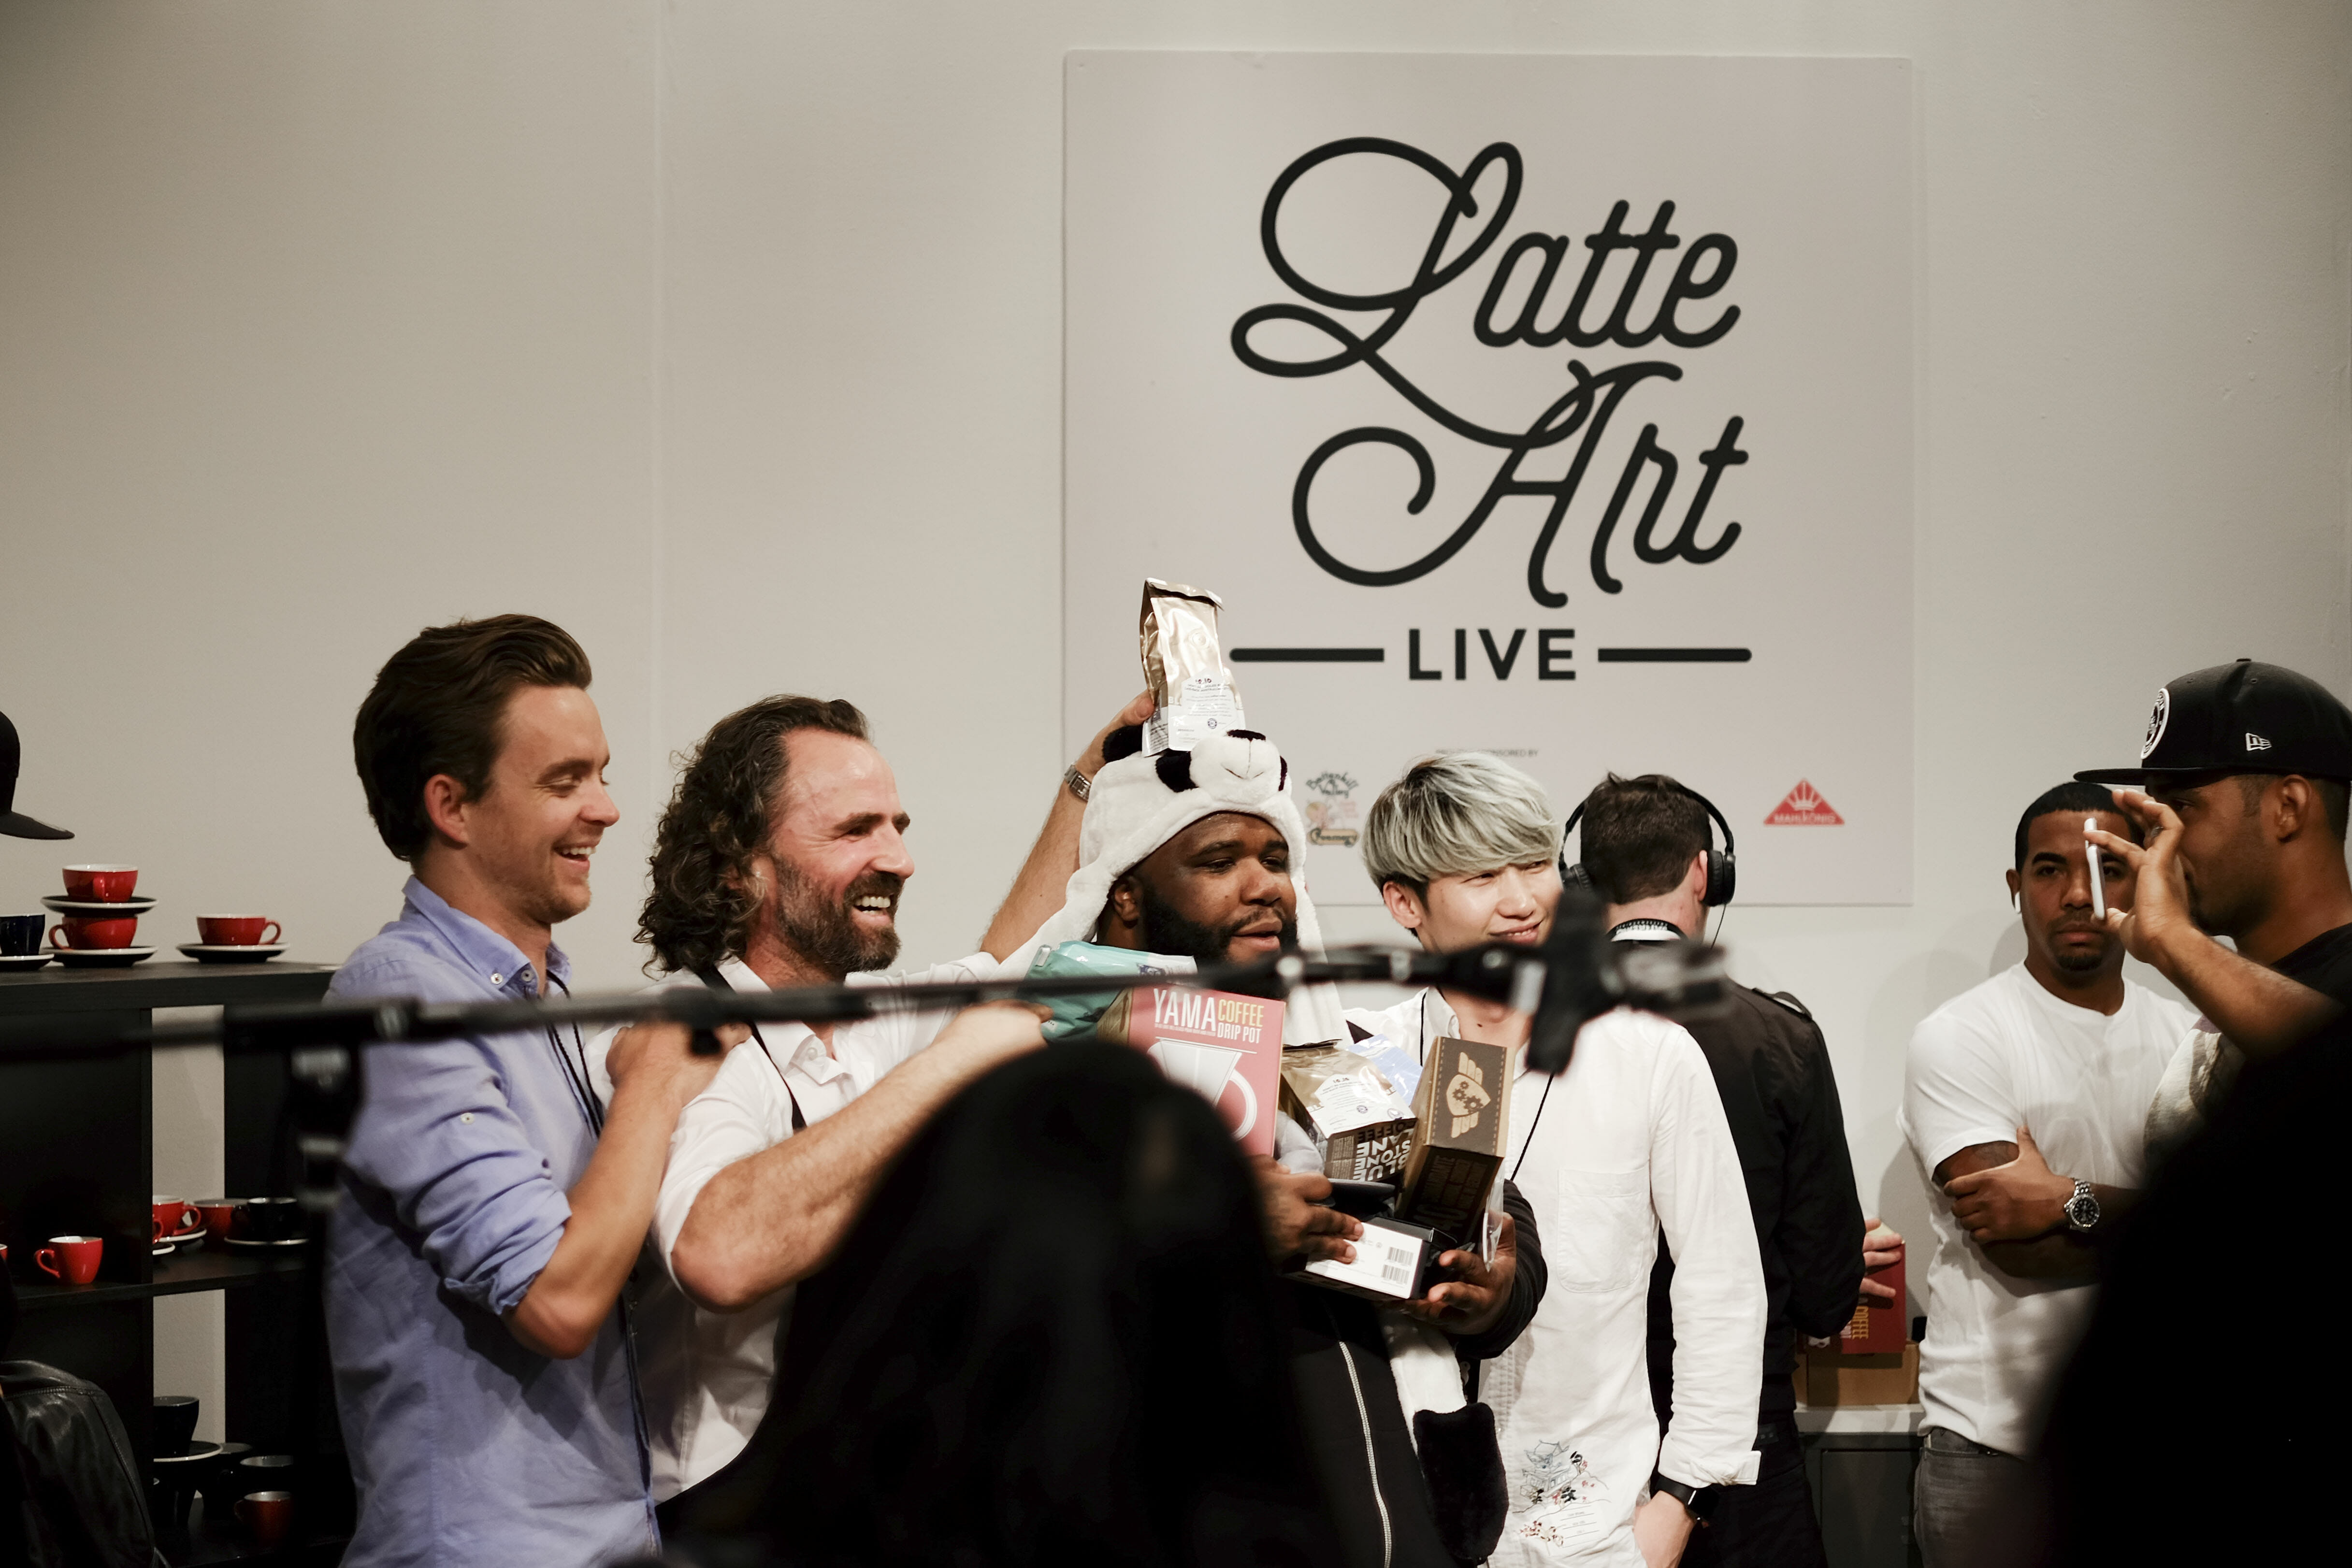 Jai Lott celebrating with winners of the live latte art competition.